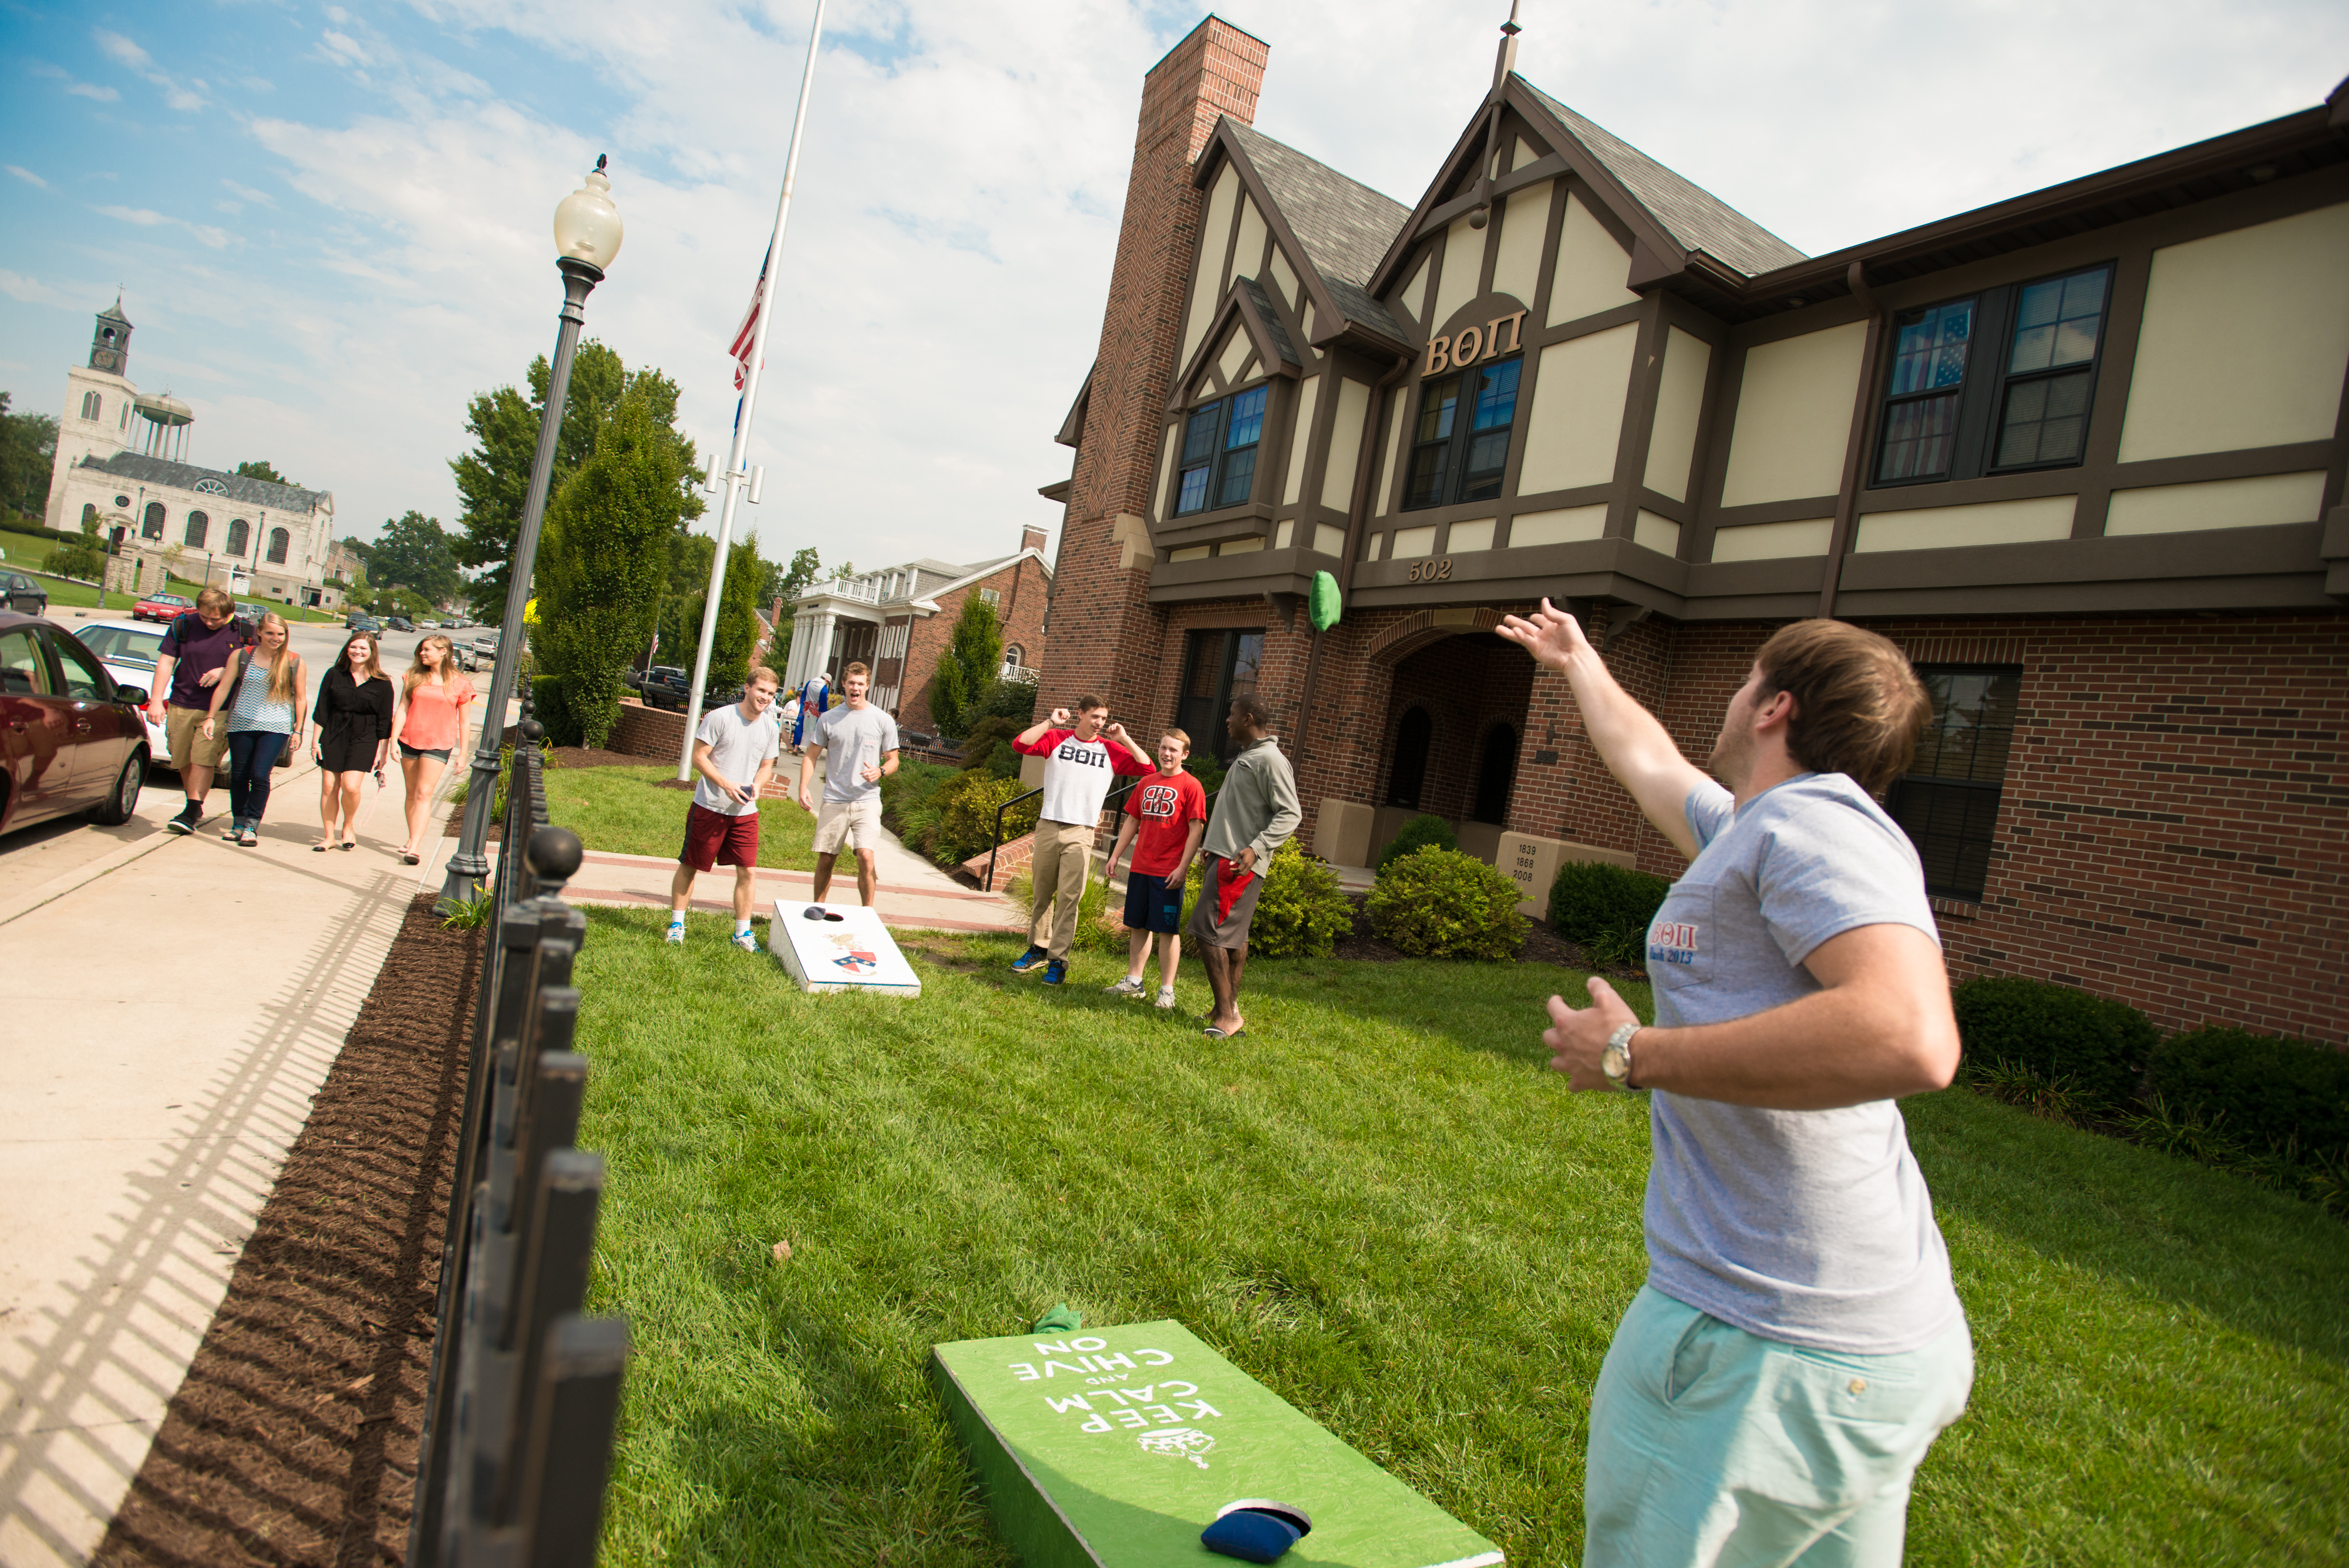 Leadership society students hold a charity event on Westminster’s campus lawn